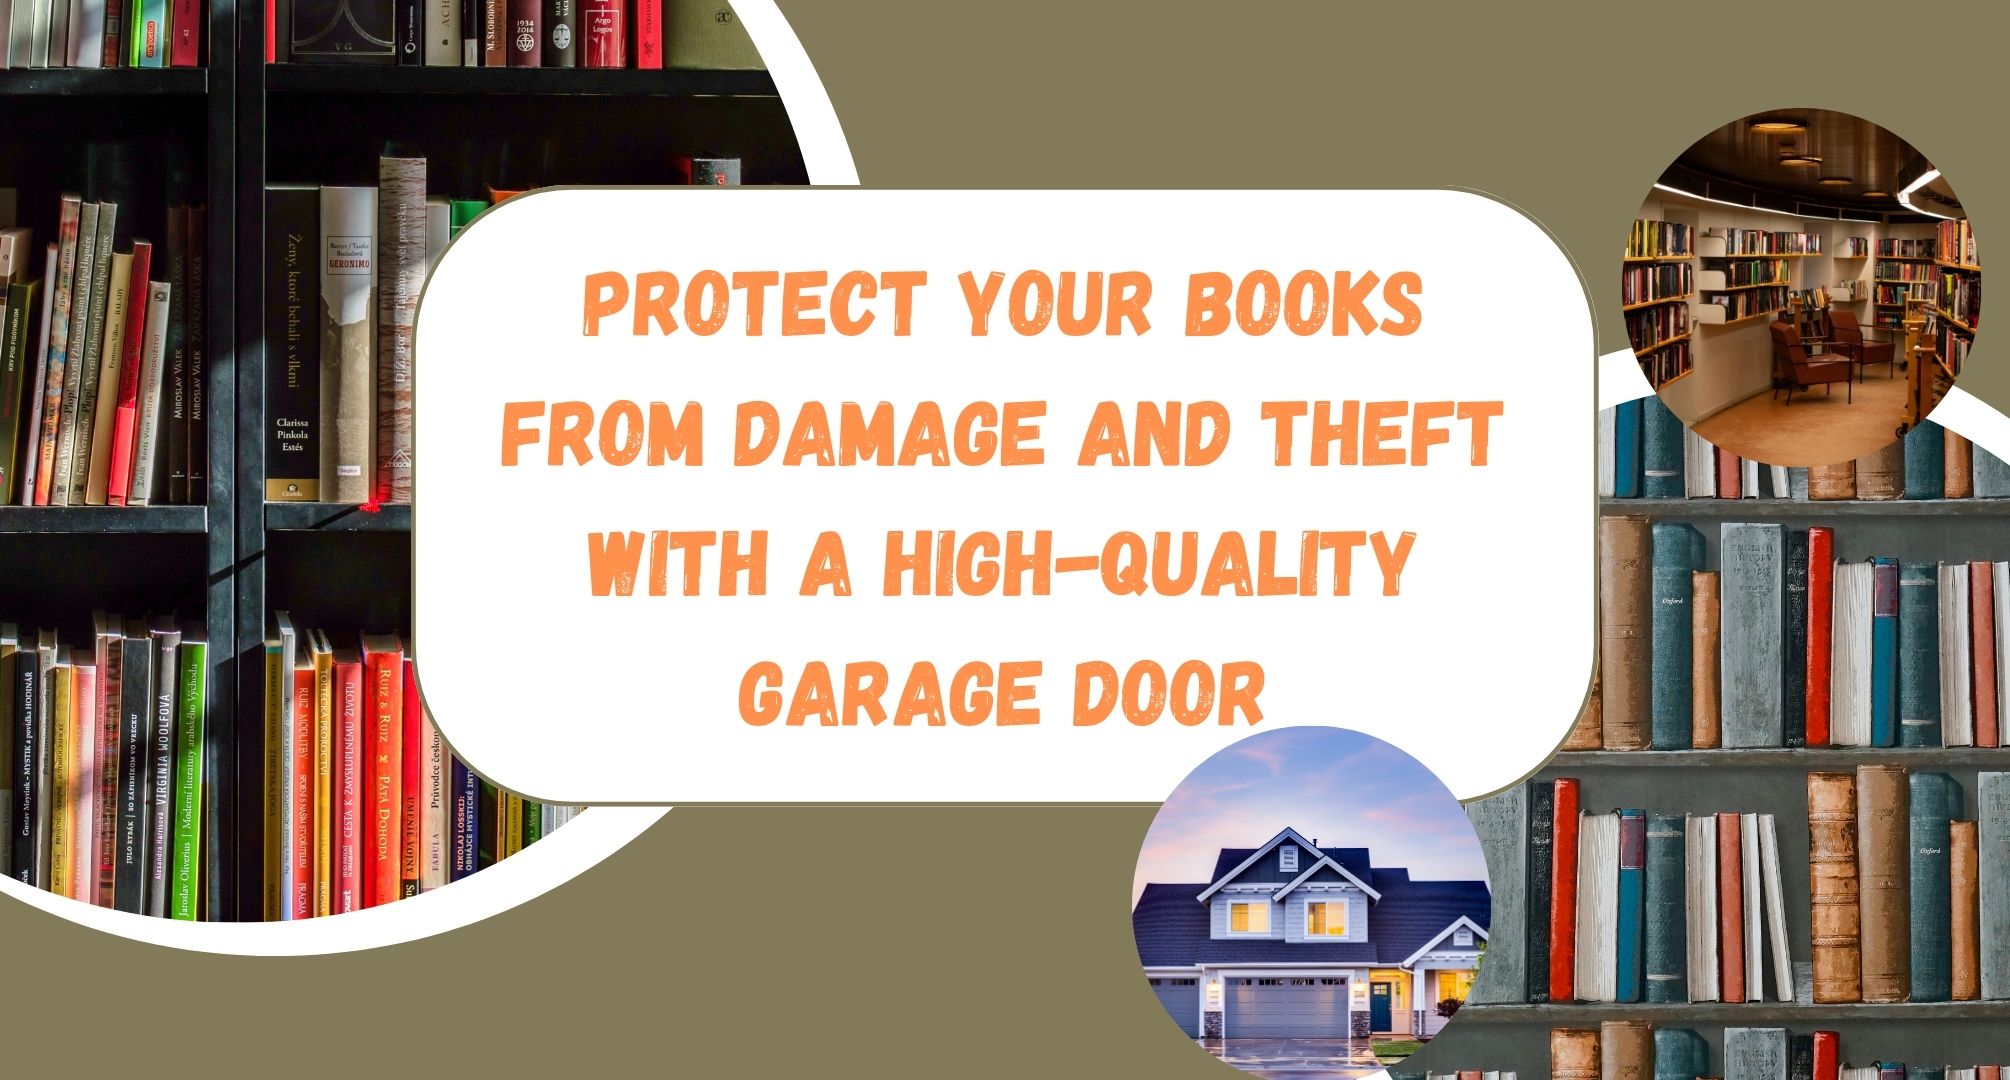 Protect Your Books from Damage and Theft with a High-Quality Garage Door